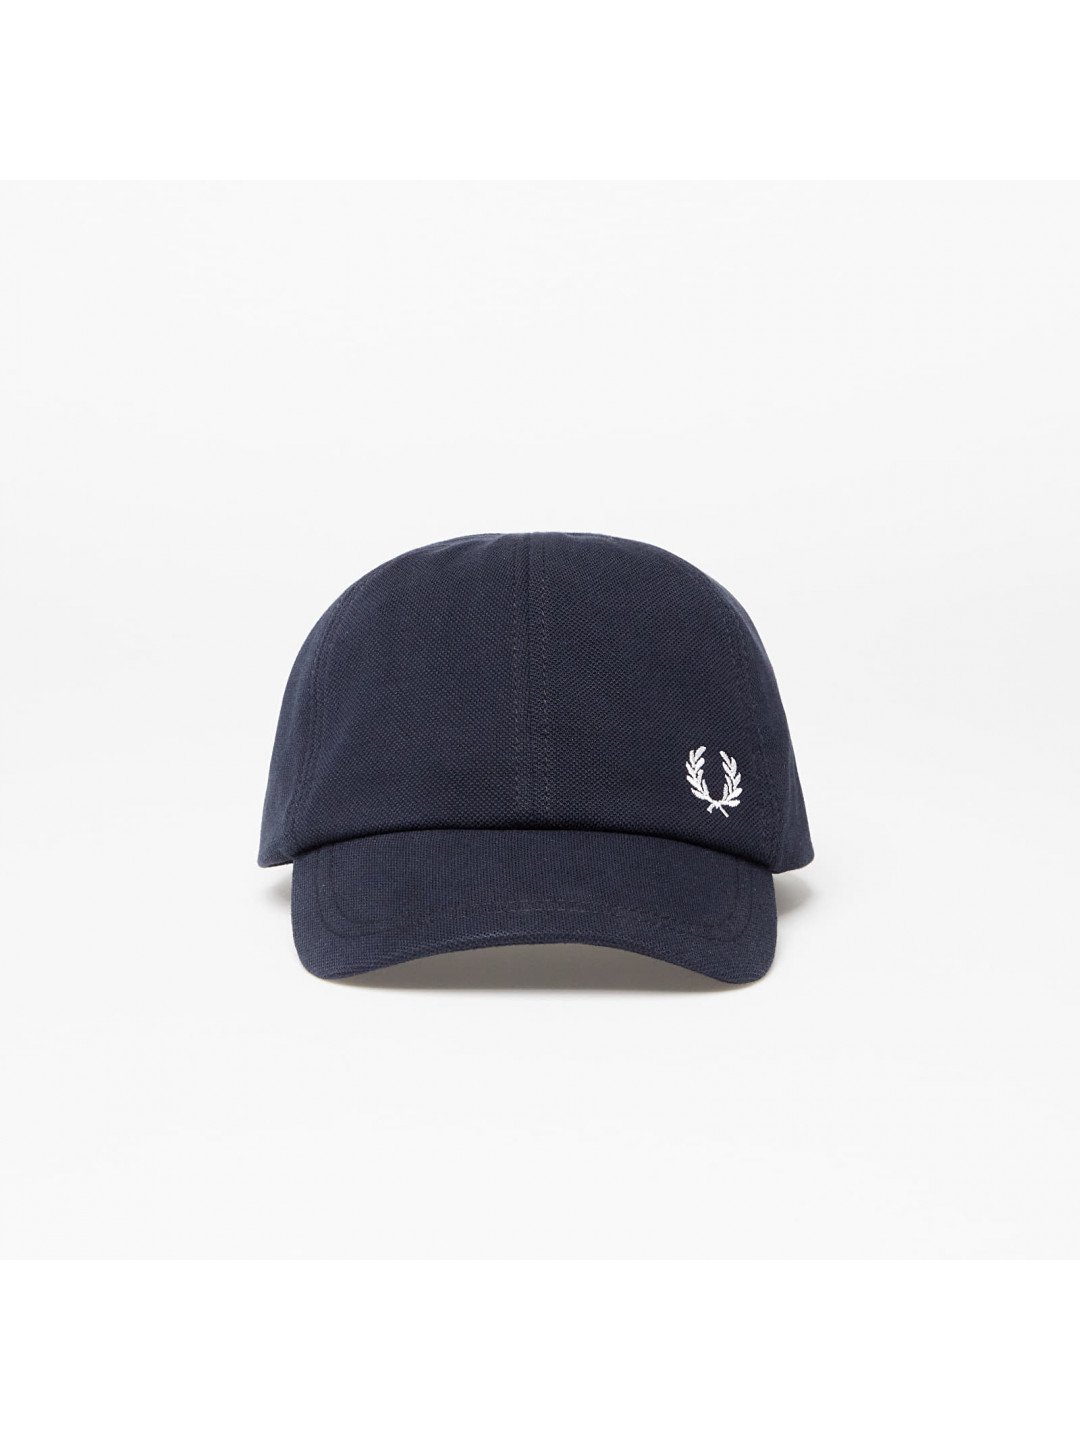 FRED PERRY Pique Classic Cap Navy Snow White